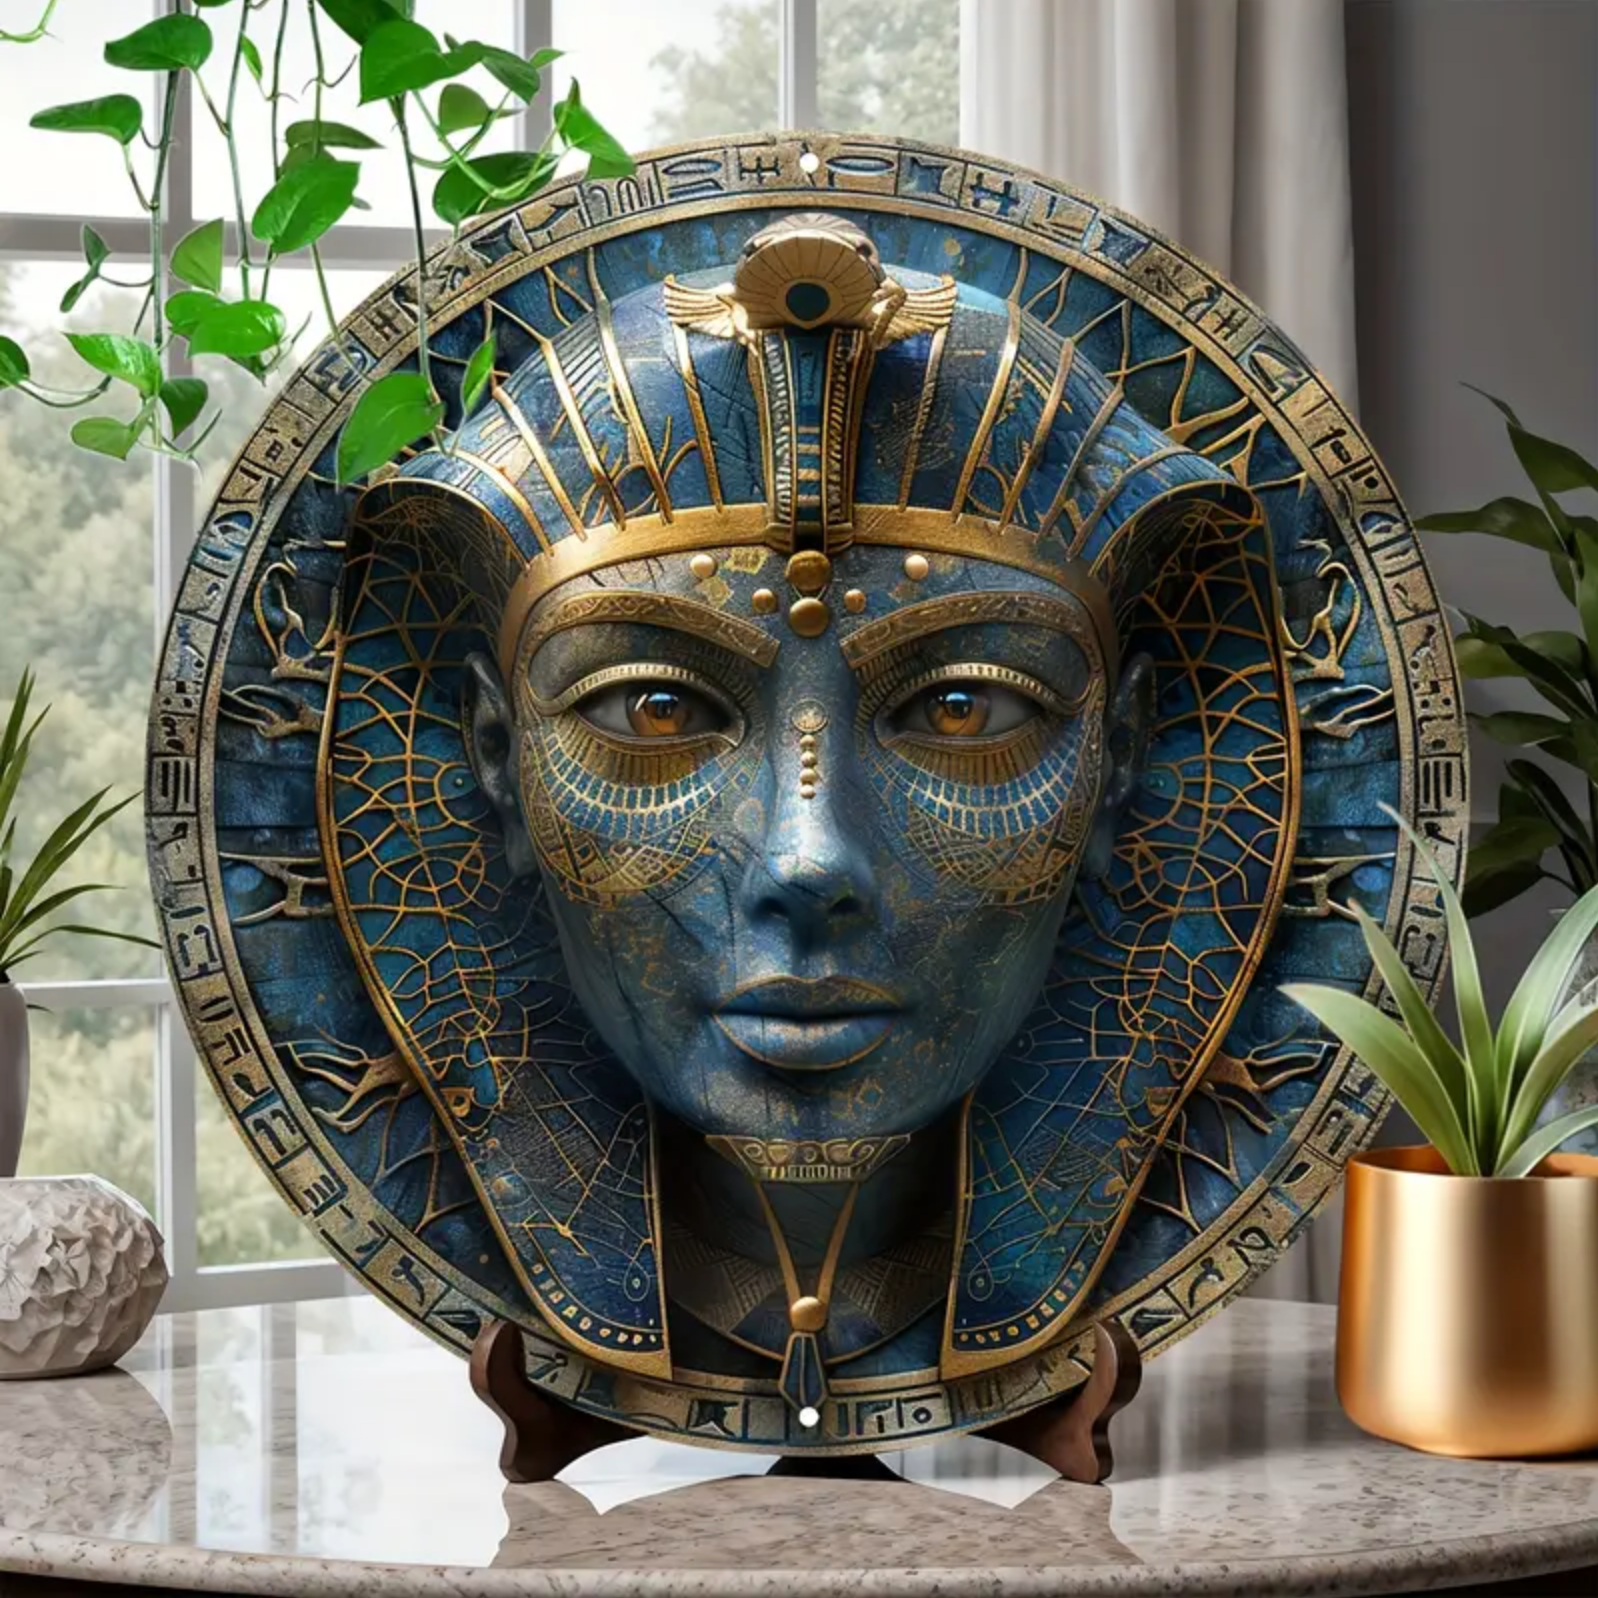 Egyptian Pharaoh Mask Round Aluminum Sign 8x8 Inch - Decorative Ancient Egypt Themed Metal Plaque for Door, Wall Art